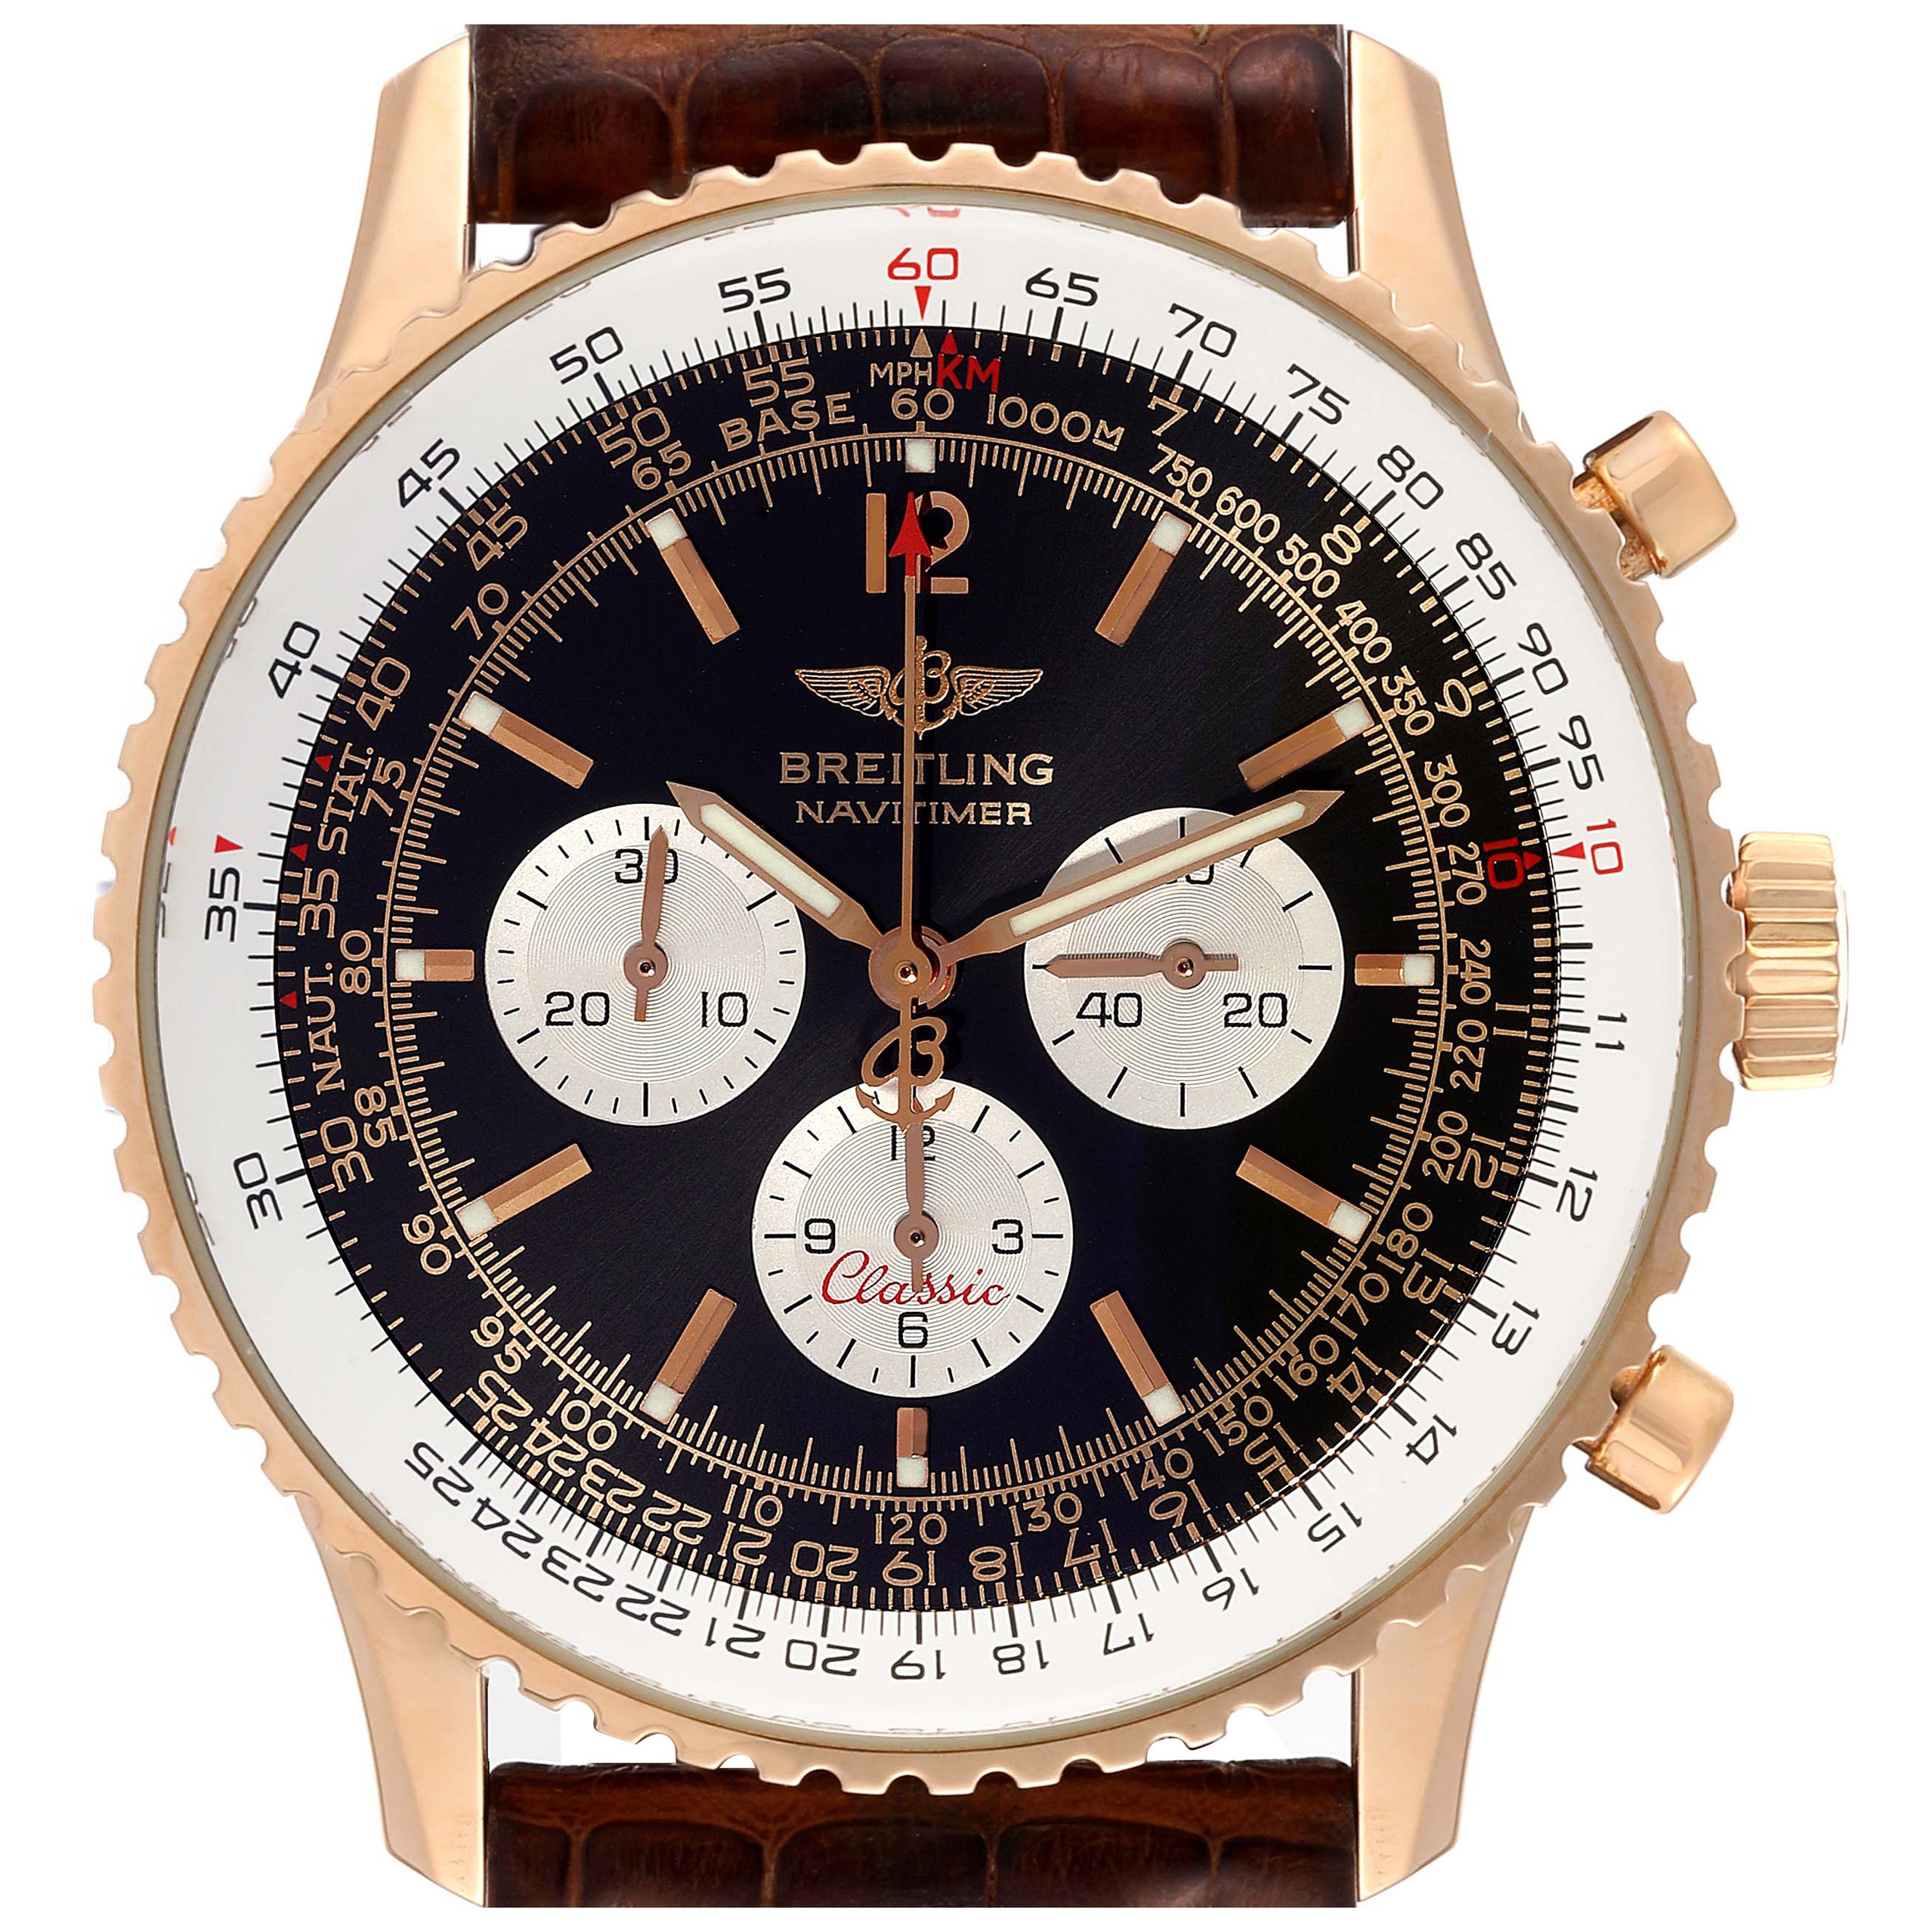 Breitling Navitimer Classic LE Rose Gold Mens Watch H30330 Box Papers For Sale